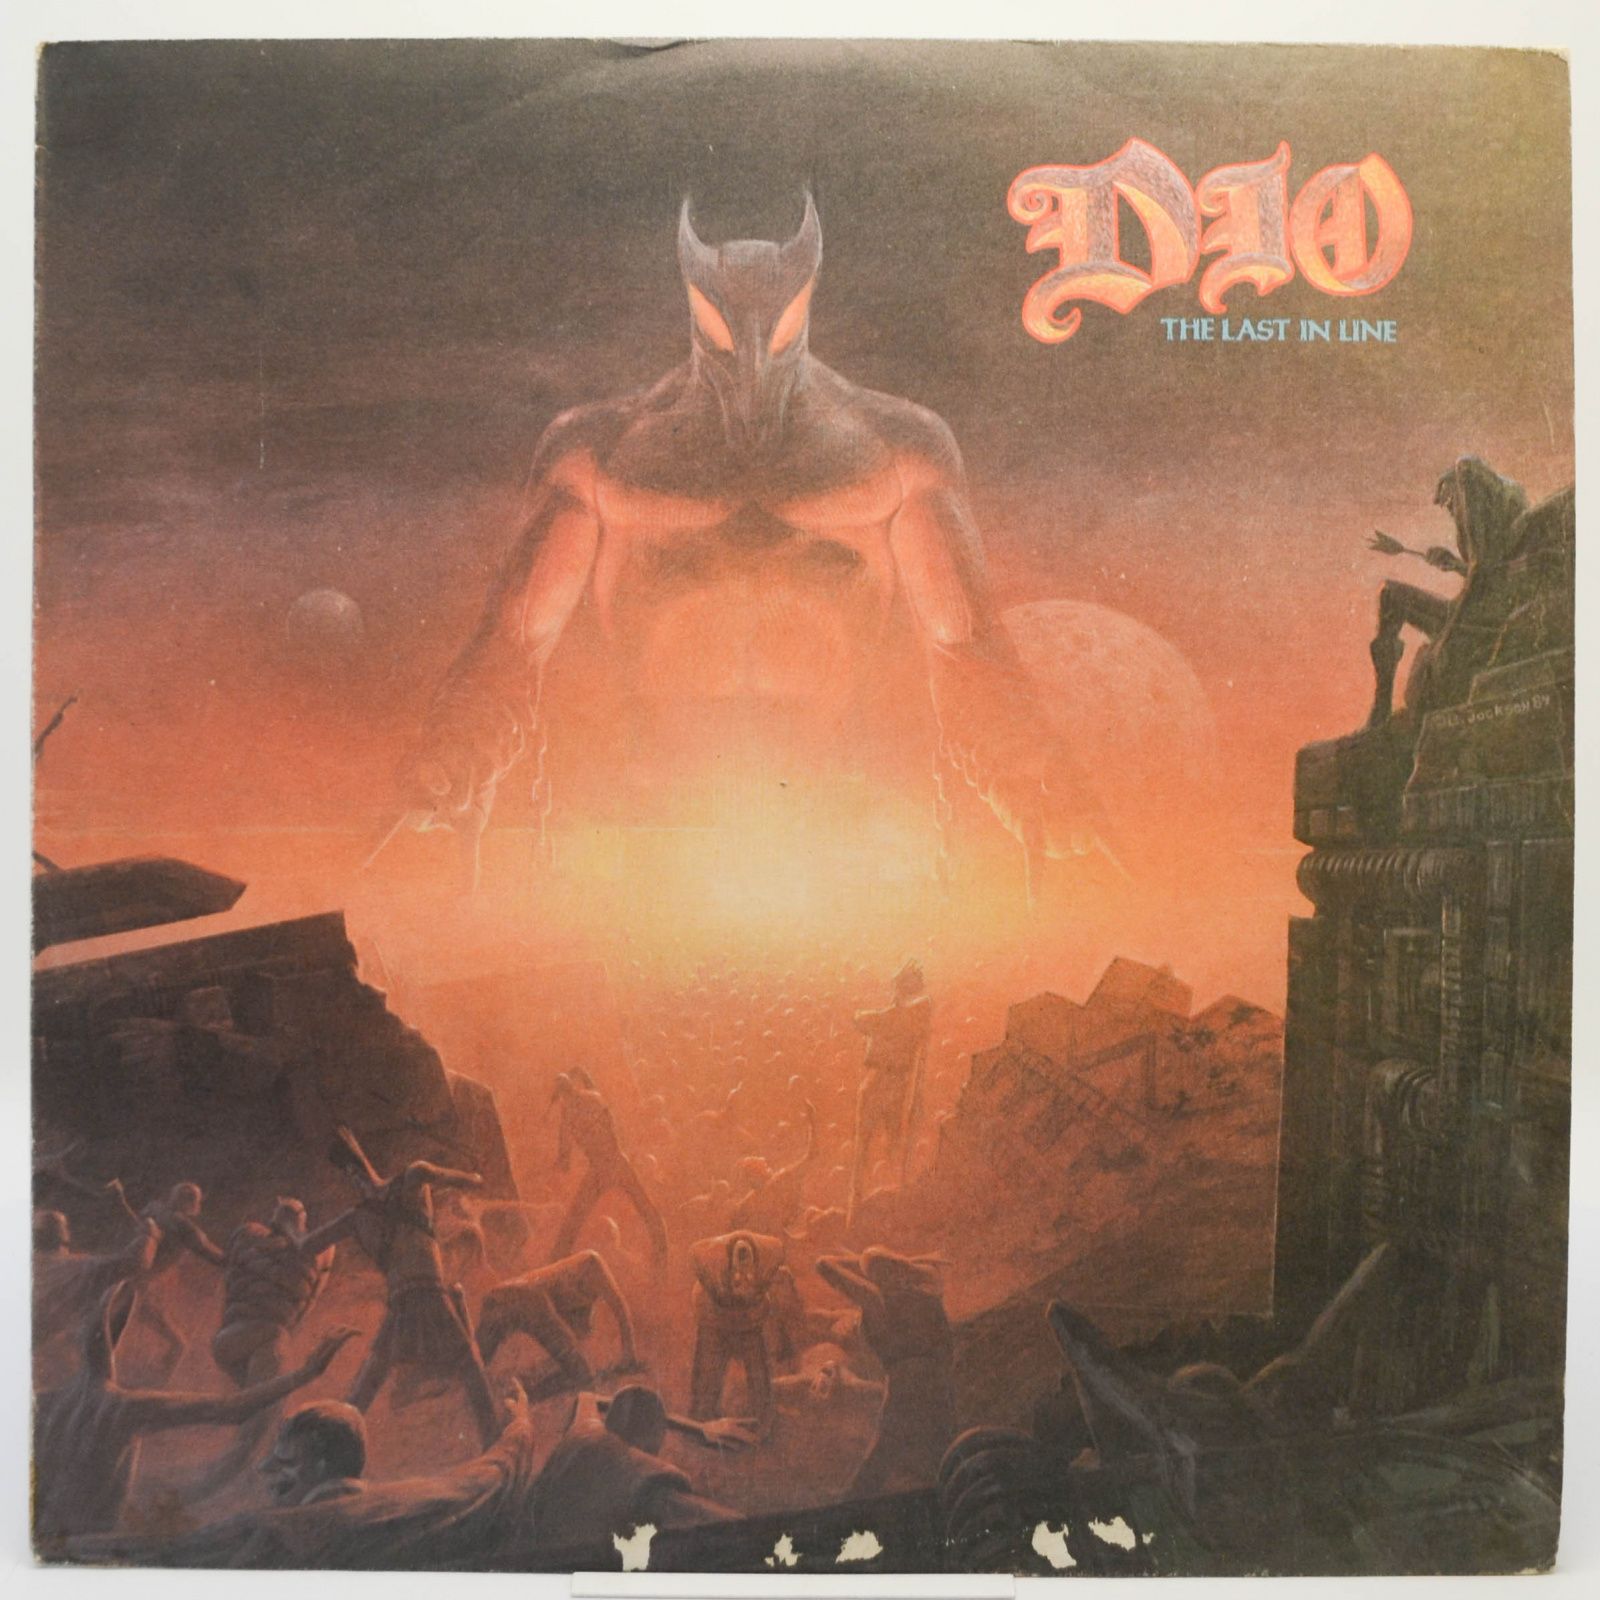 Dio — The Last In Line, 1988